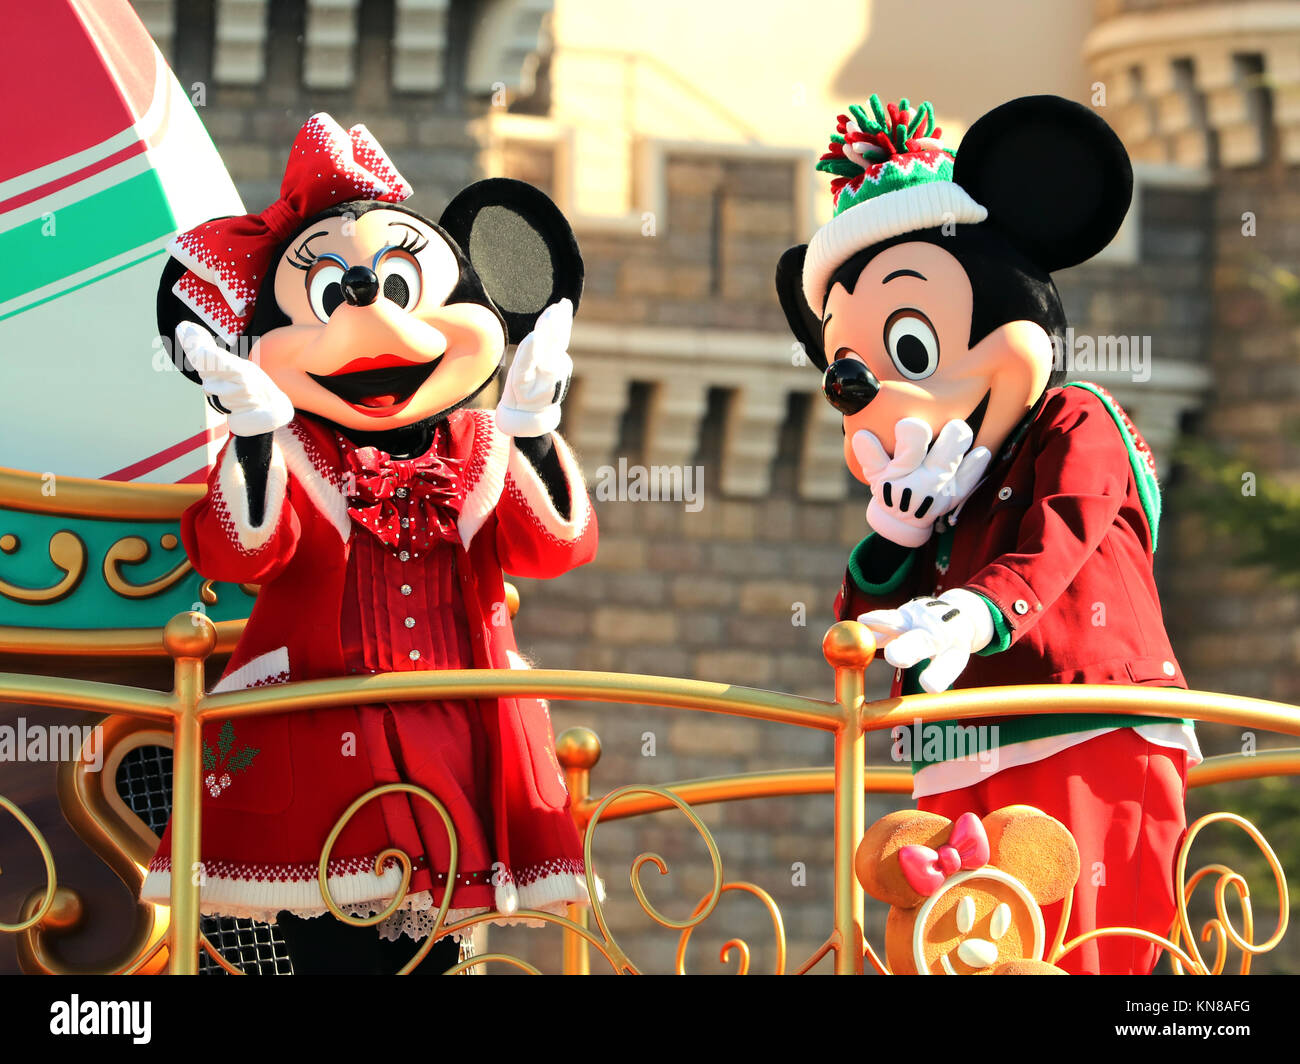 Monday. 11th Dec, 2007. December 11 2017, Urayasu, Japan - Disney character Mickey and Minnie Mouse perform on the float during a parade for Christmas 'Disney Christmas Stories' at the Tokyo Disneyland in Urayasu, suburban Tokyo on Monday, December 11, 2007. Disney characters performed as part of Christmas show which would be carried through Christmas Day. Credit: Yoshio Tsunoda/AFLO/Alamy Live News Stock Photo